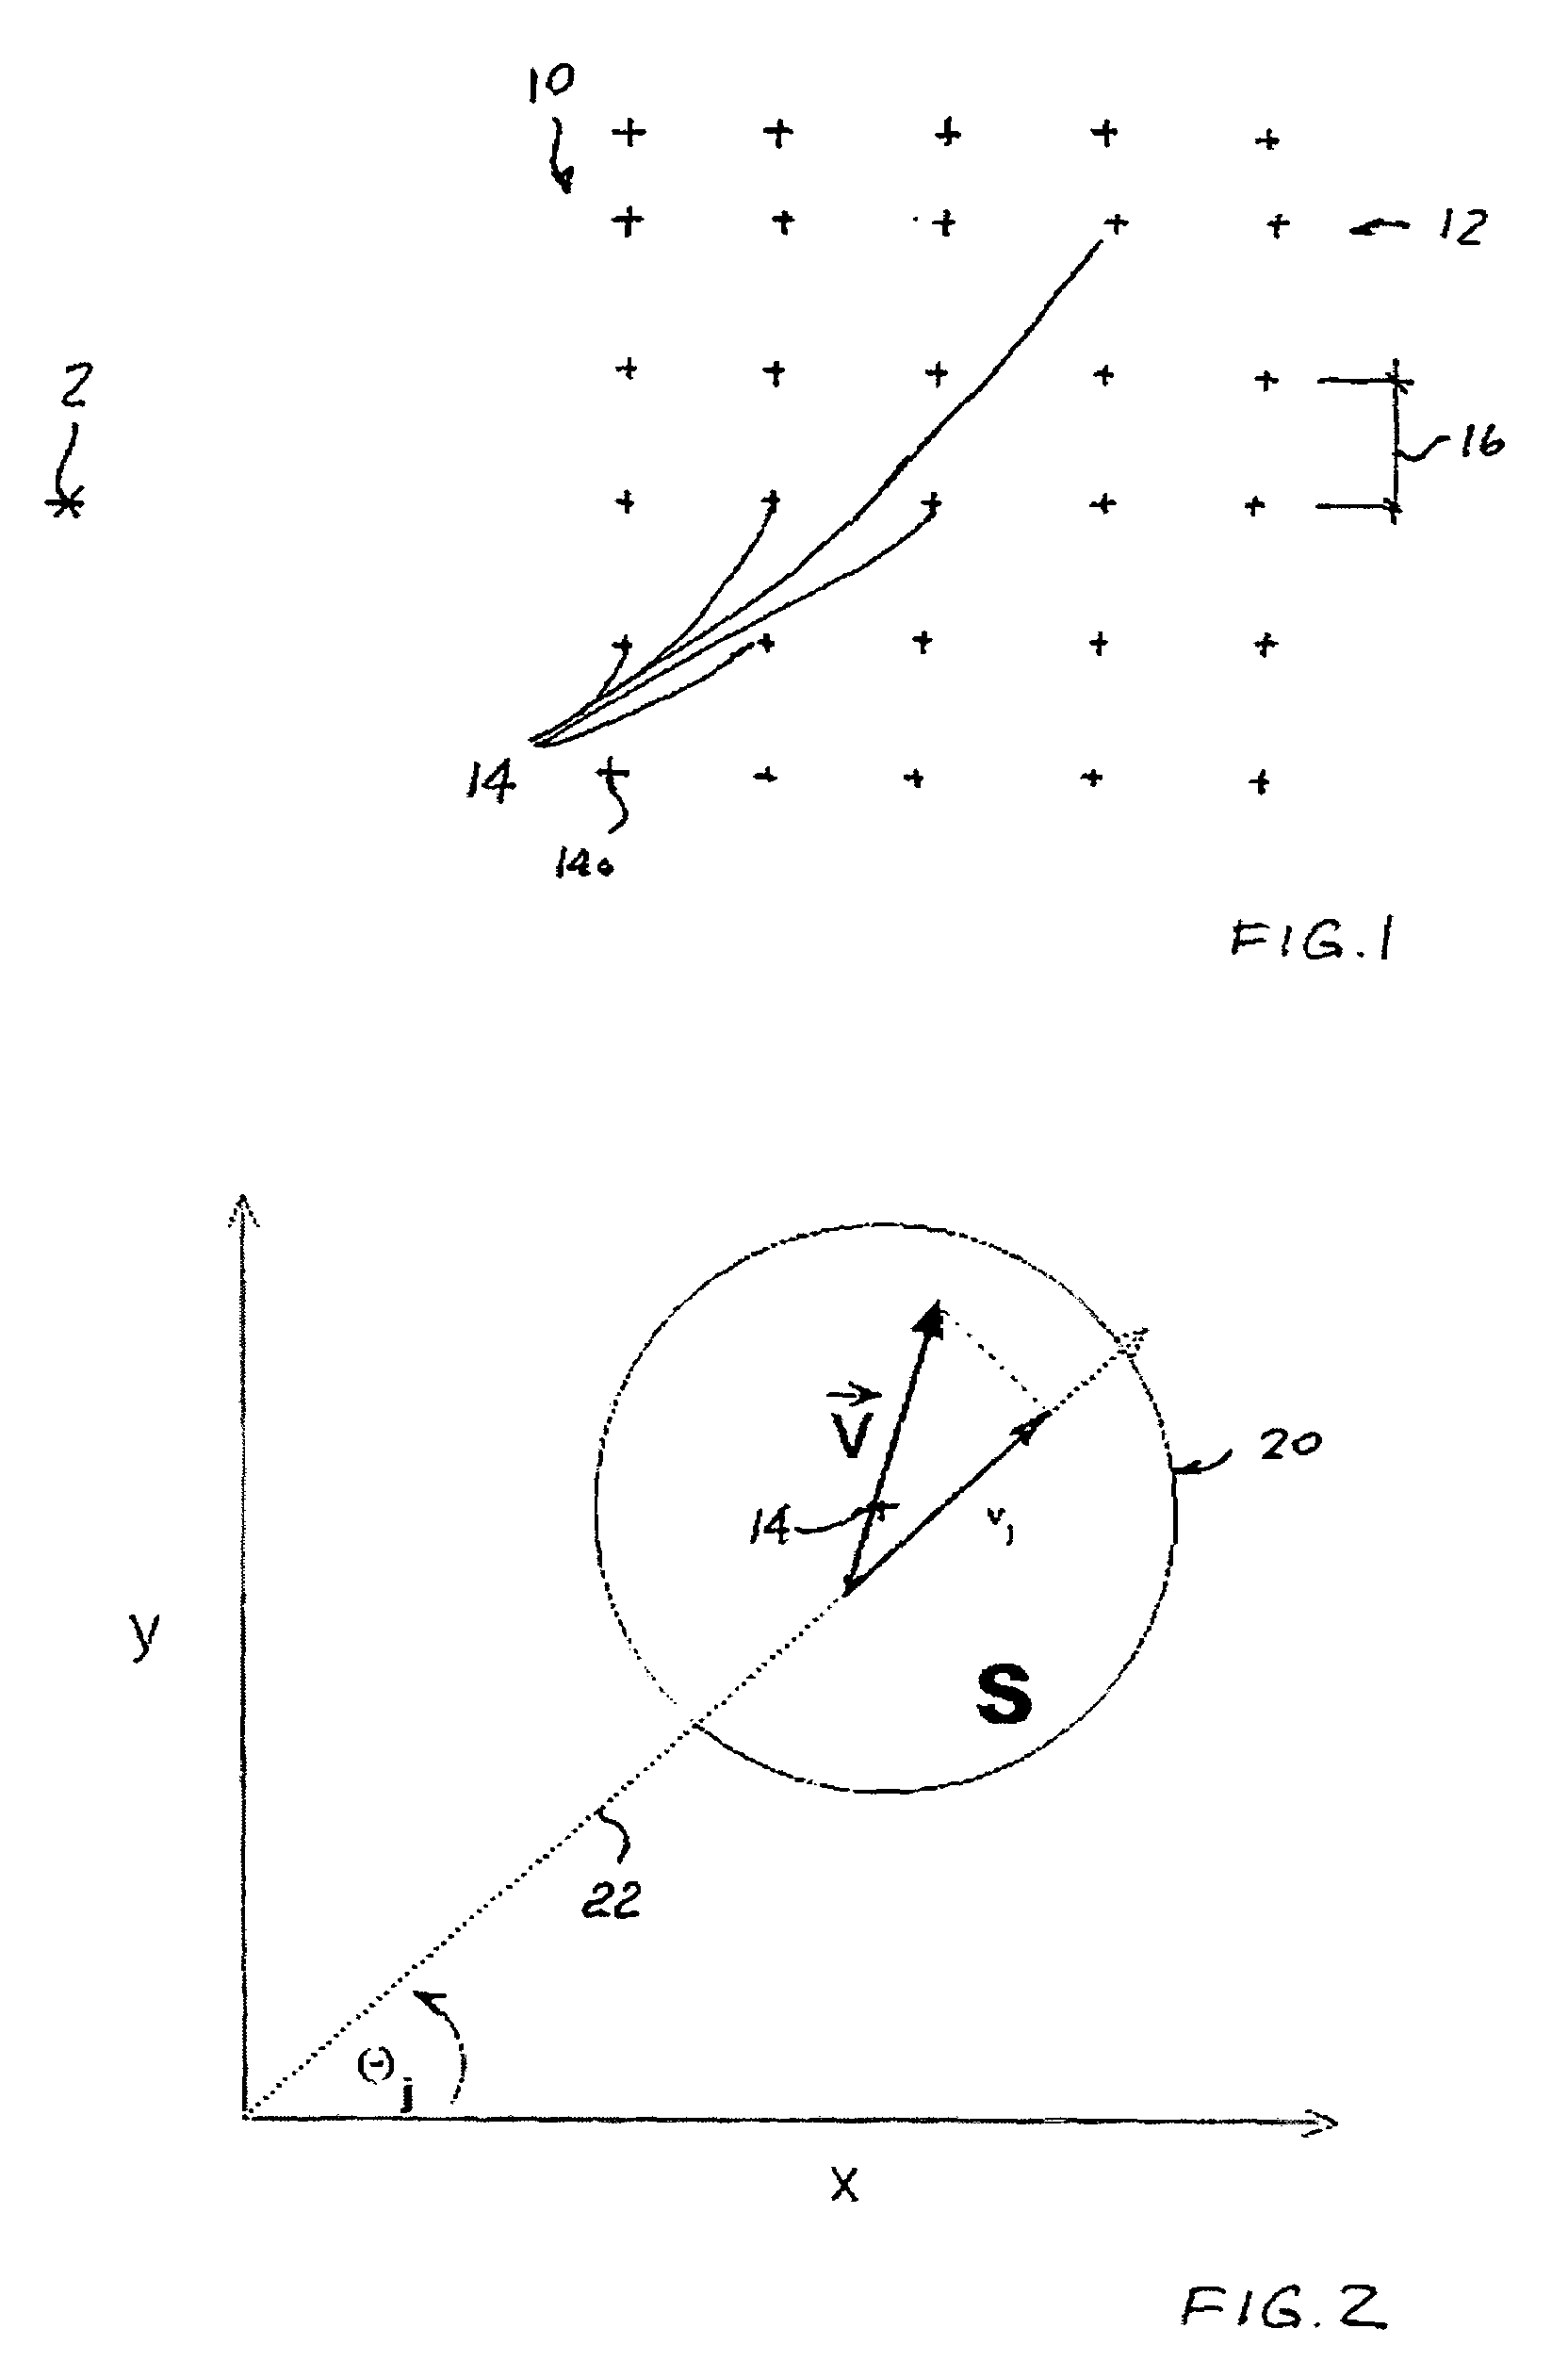 Method for measuring surface currents using a long-range single station high frequency ground wave radar system